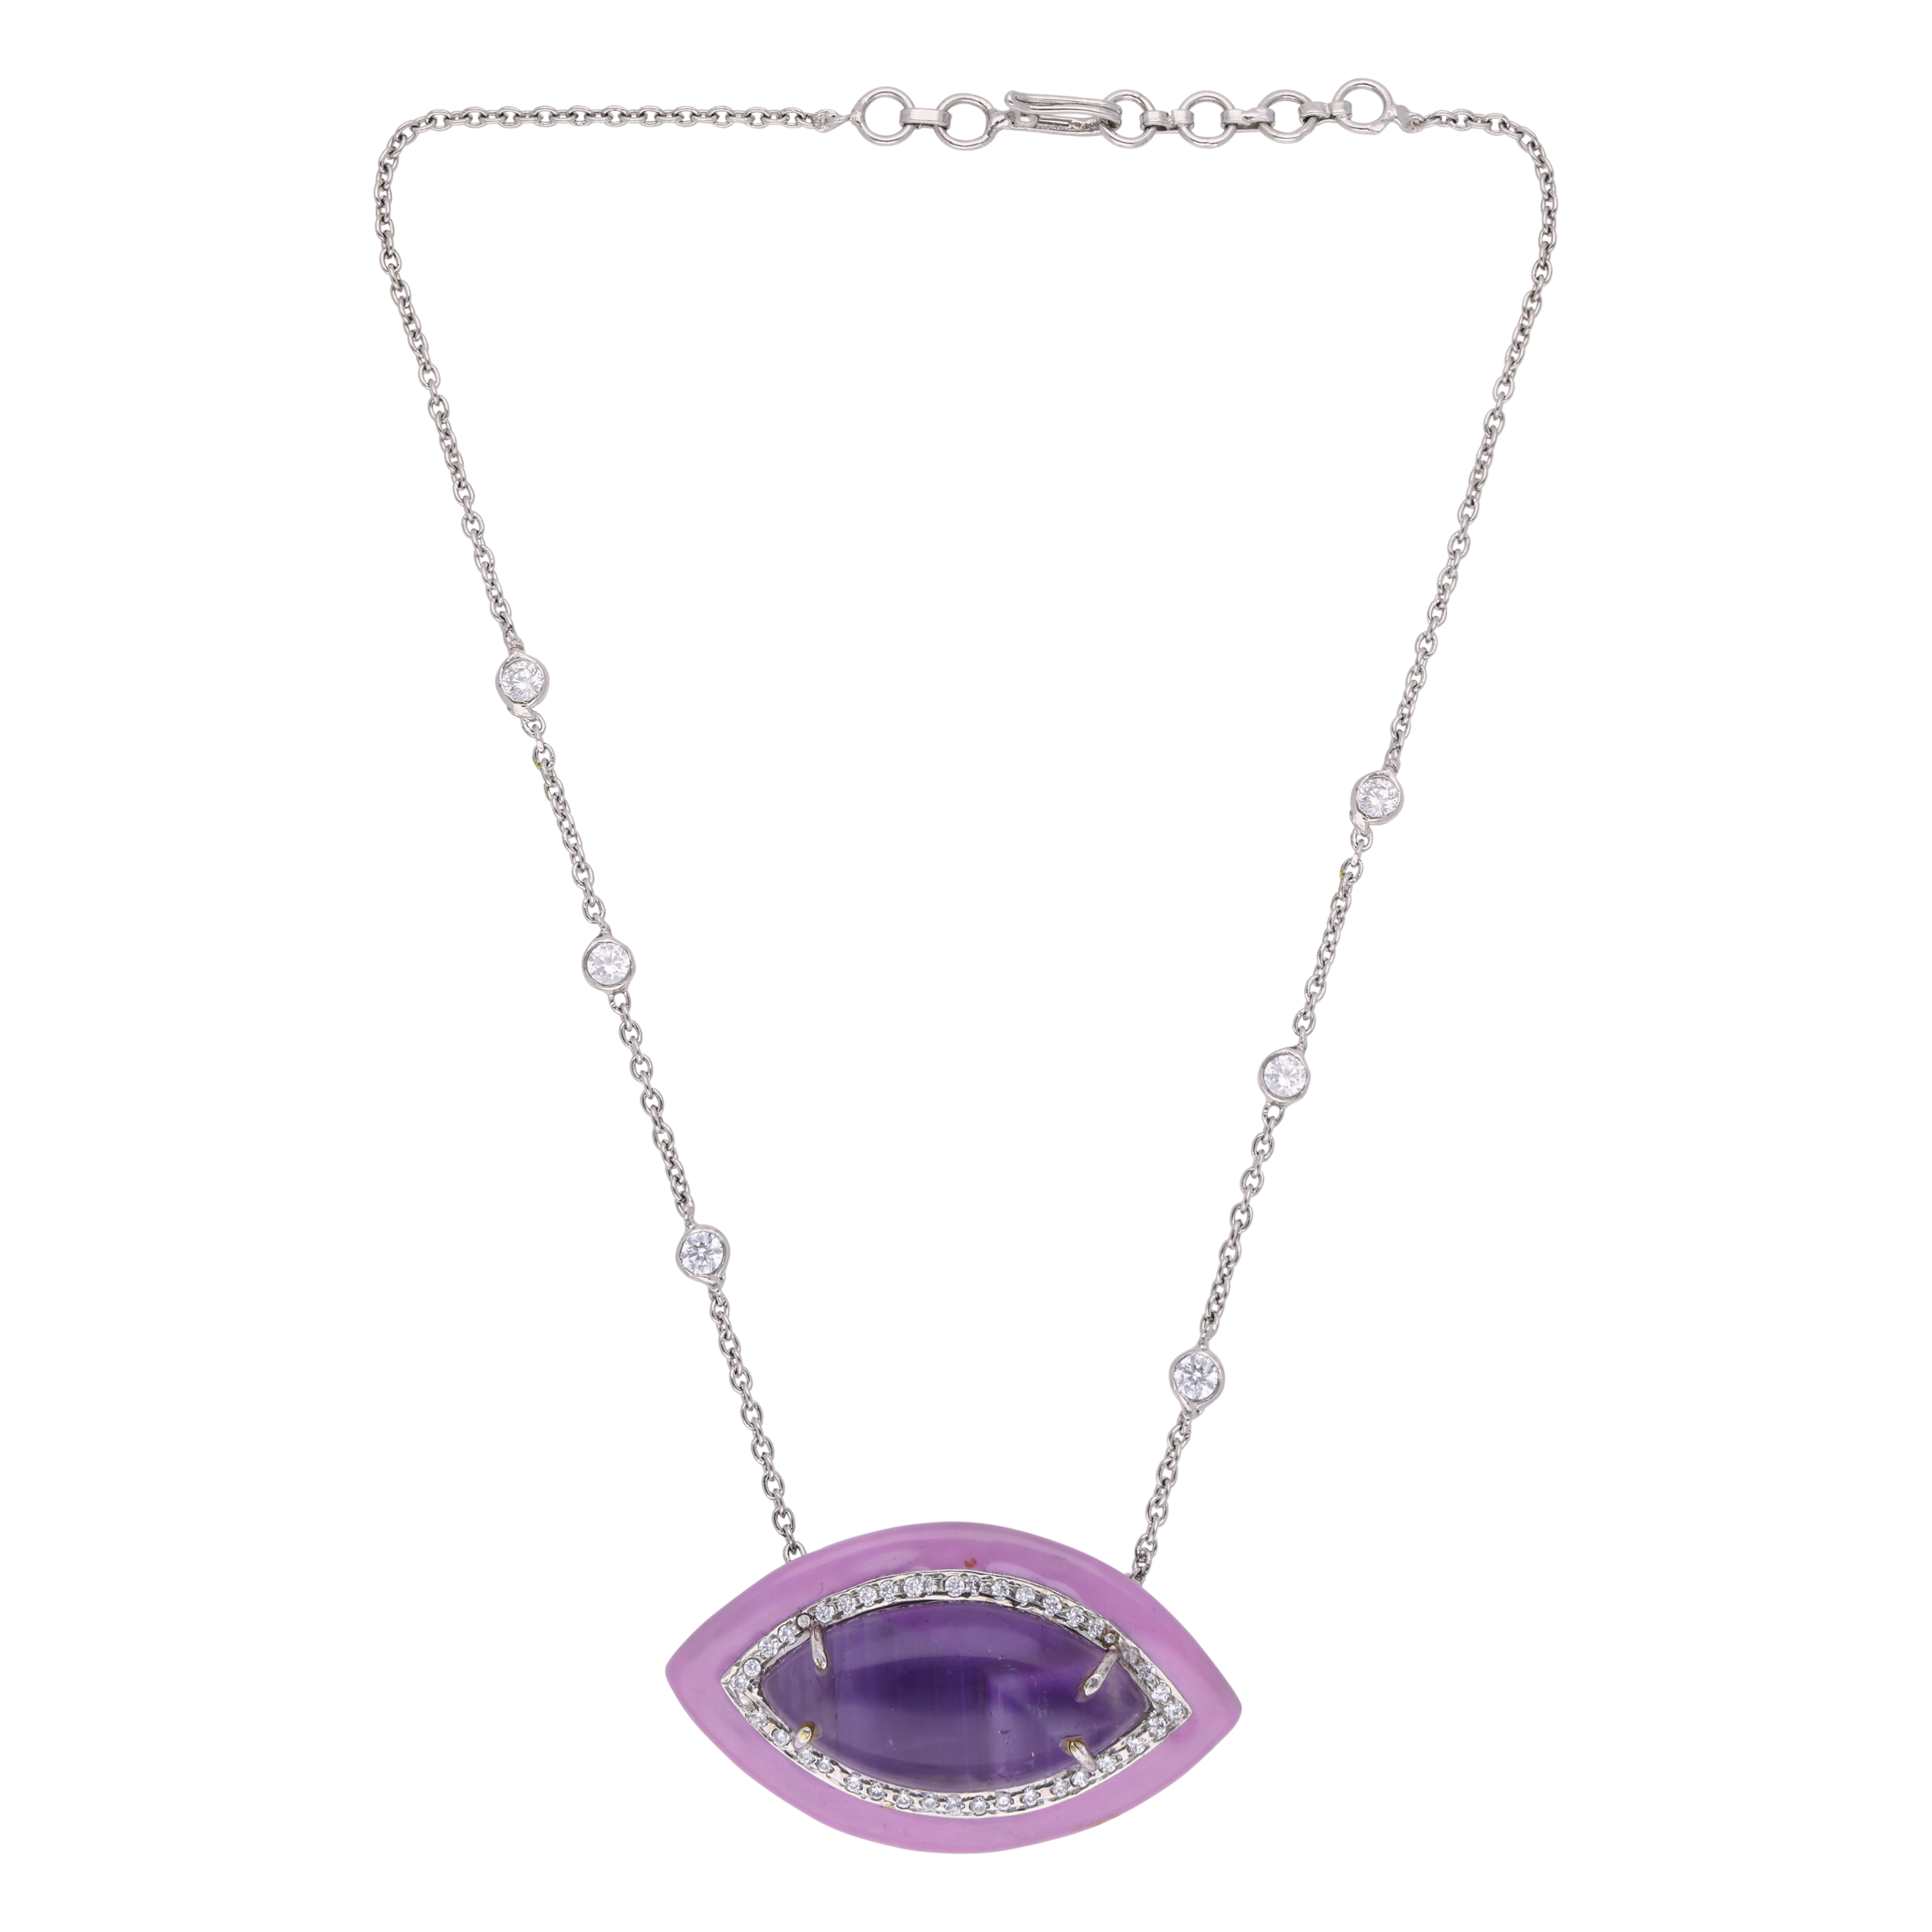 Elegant Sterling Silver Pendant Chain with Amethyst Stone | SKU : 0003242537